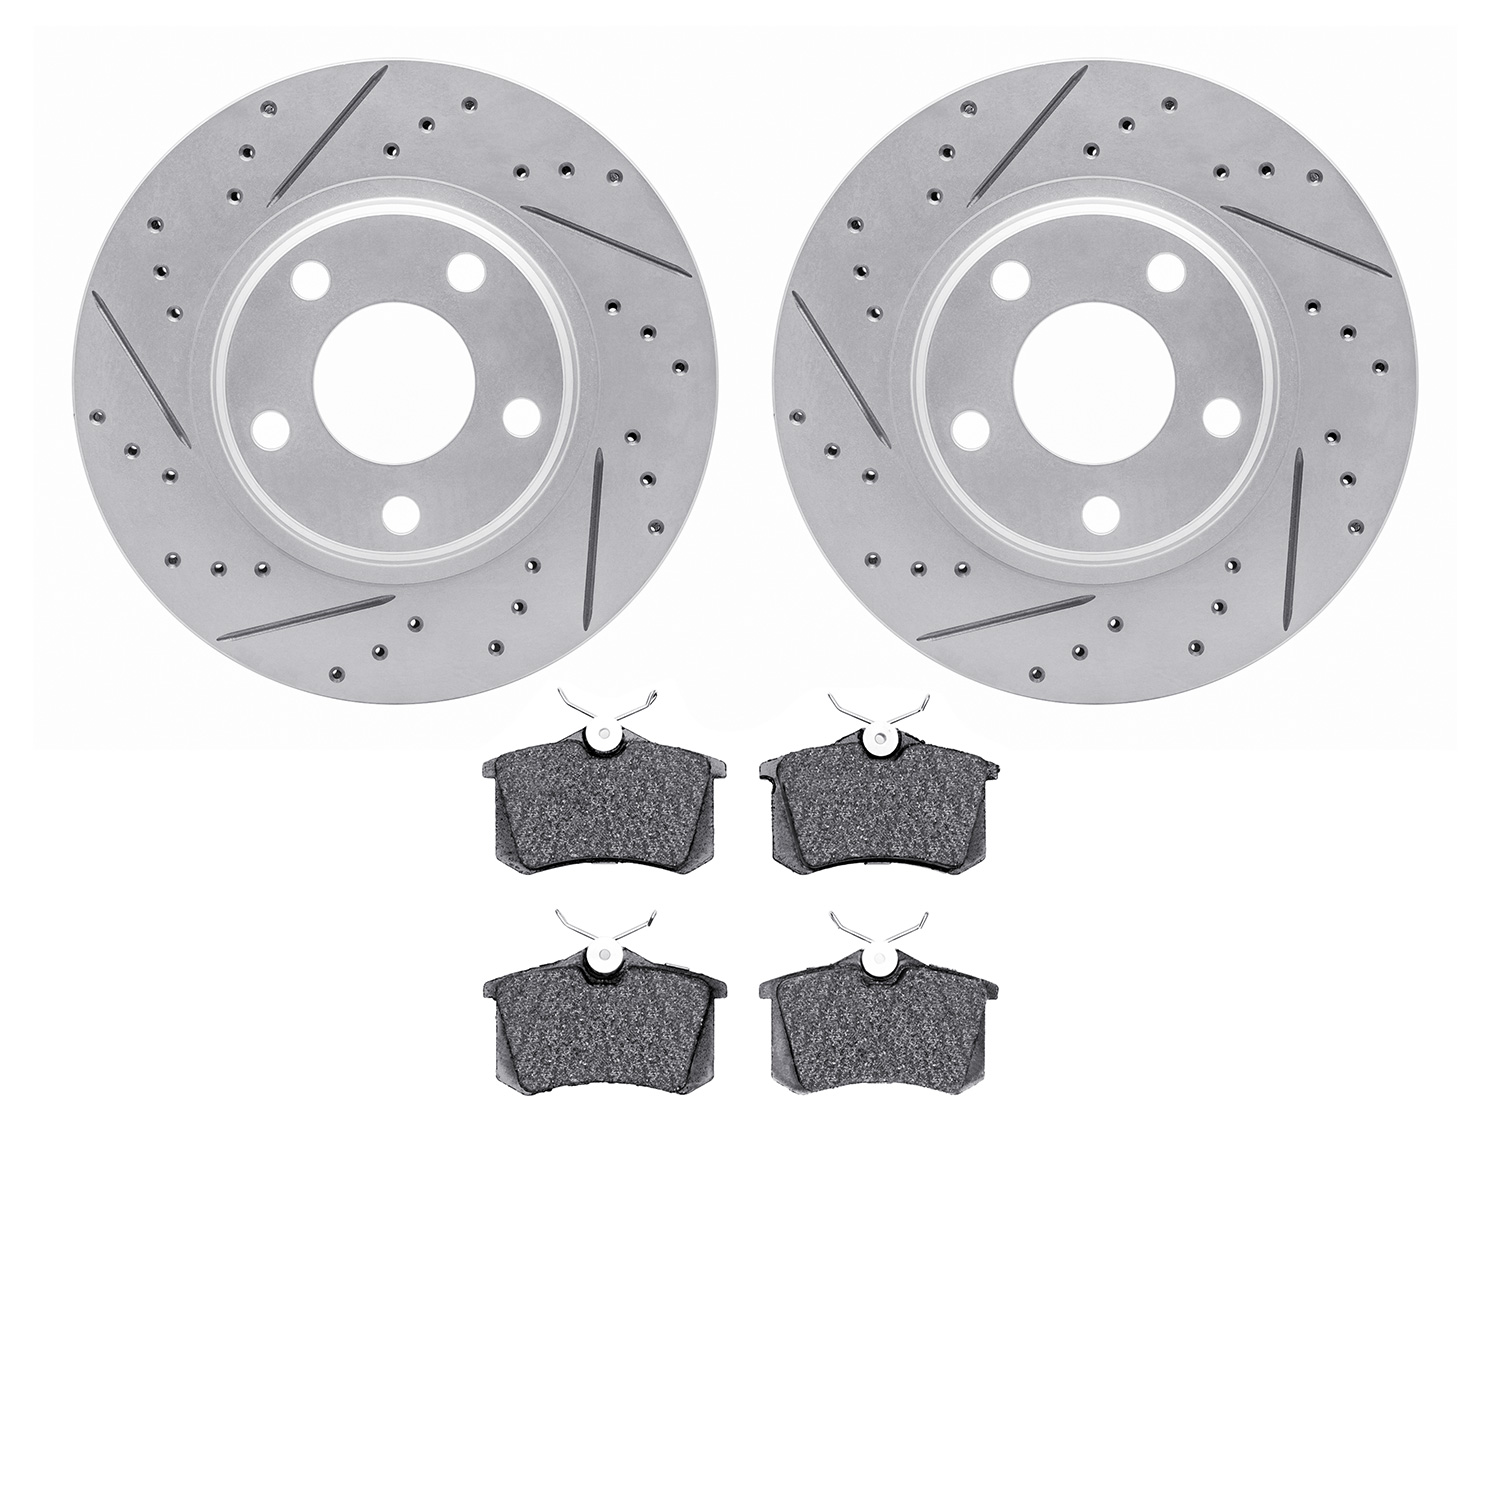 2502-74015 Geoperformance Drilled/Slotted Rotors w/5000 Advanced Brake Pads Kit, 2001-2003 Audi/Volkswagen, Position: Rear